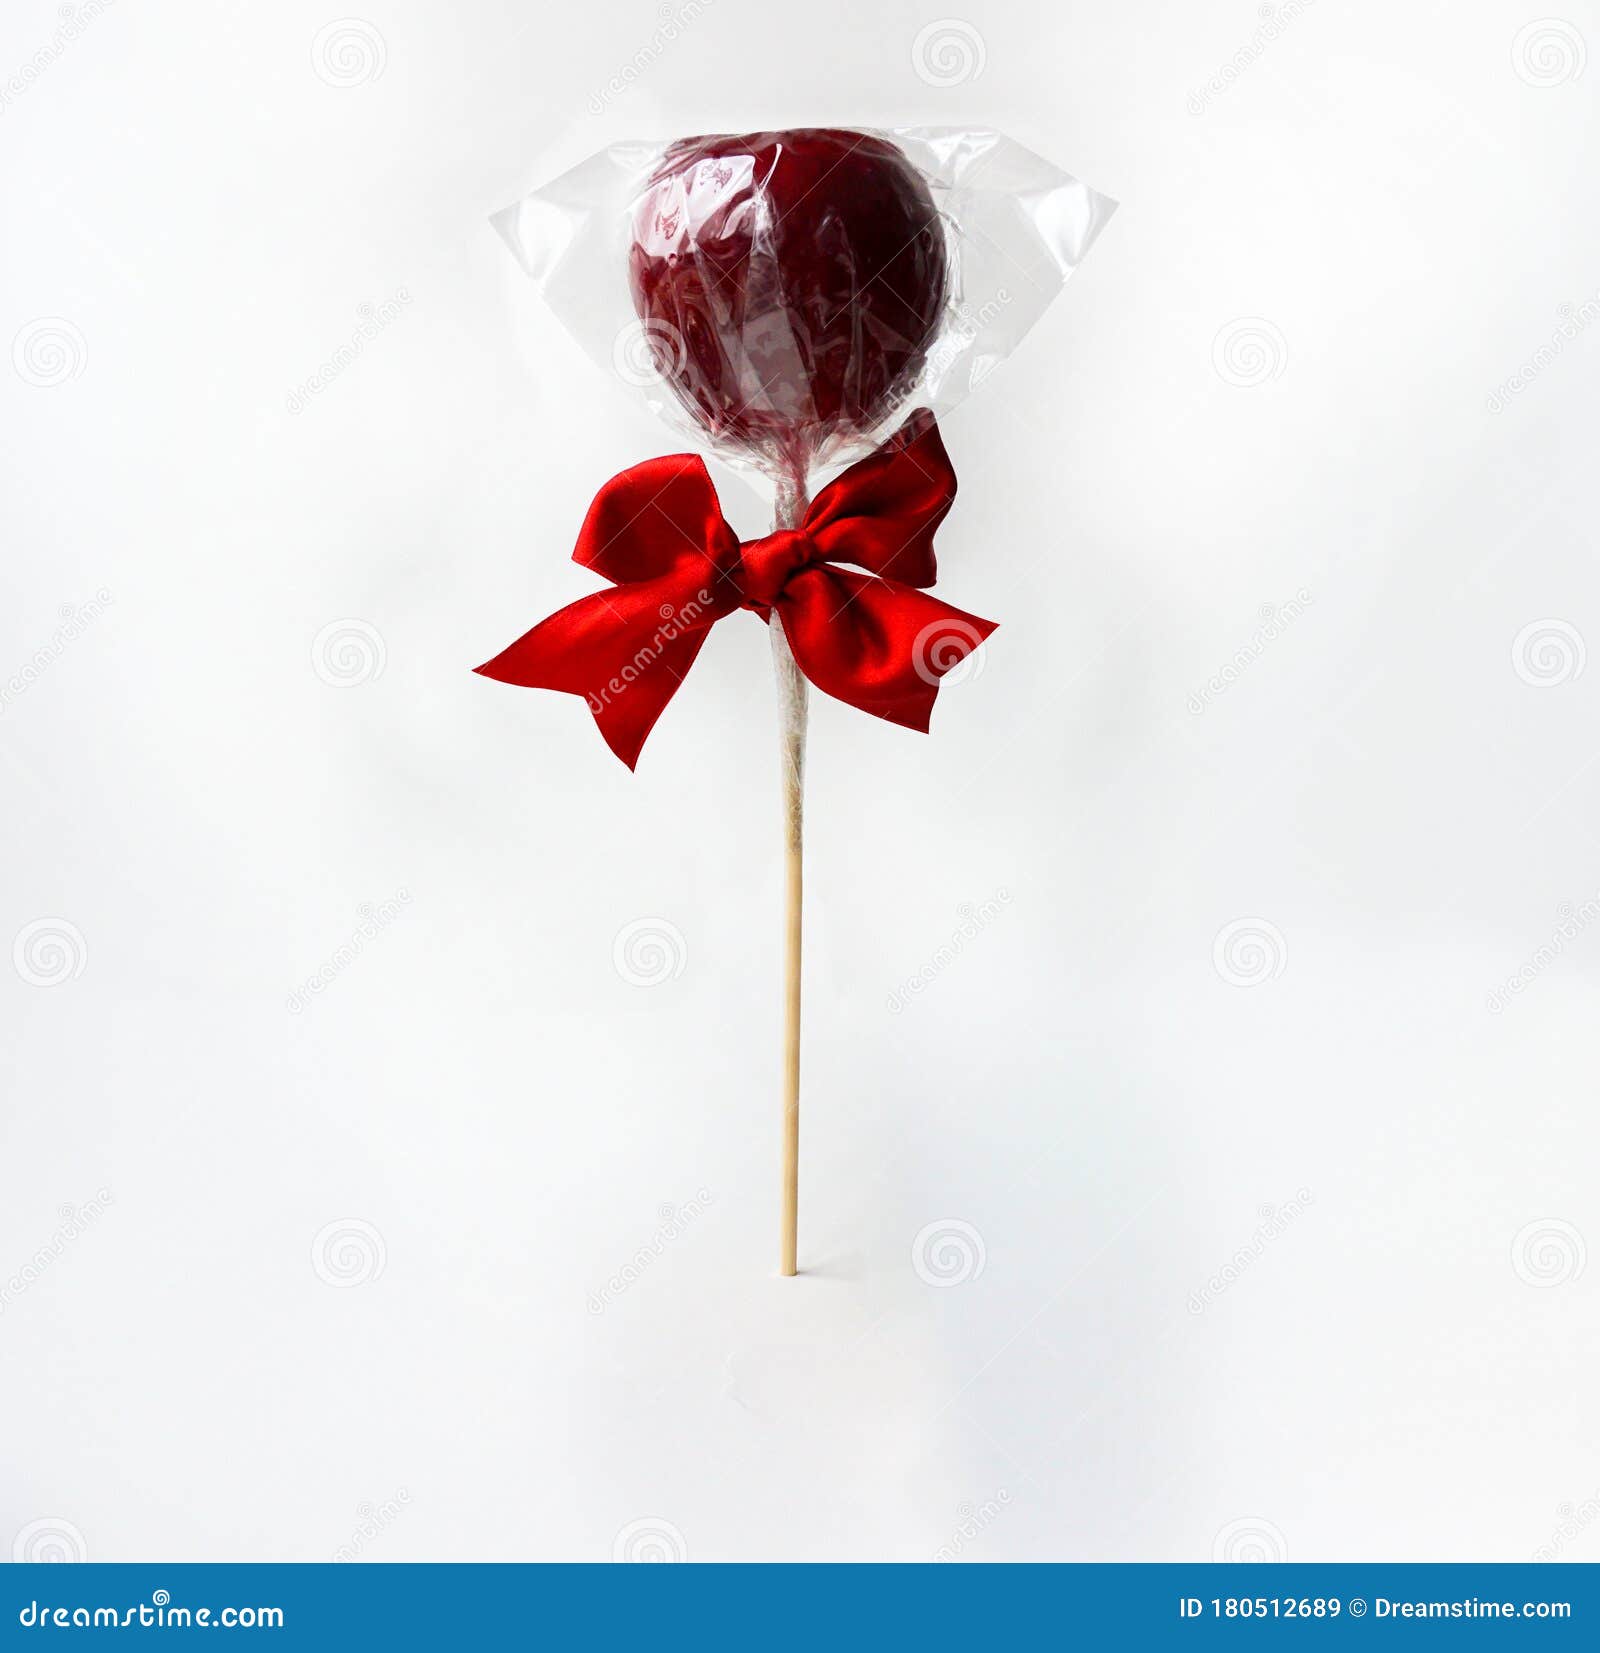 Toffee Apple Candy Apple Stock Image Image Of Candied